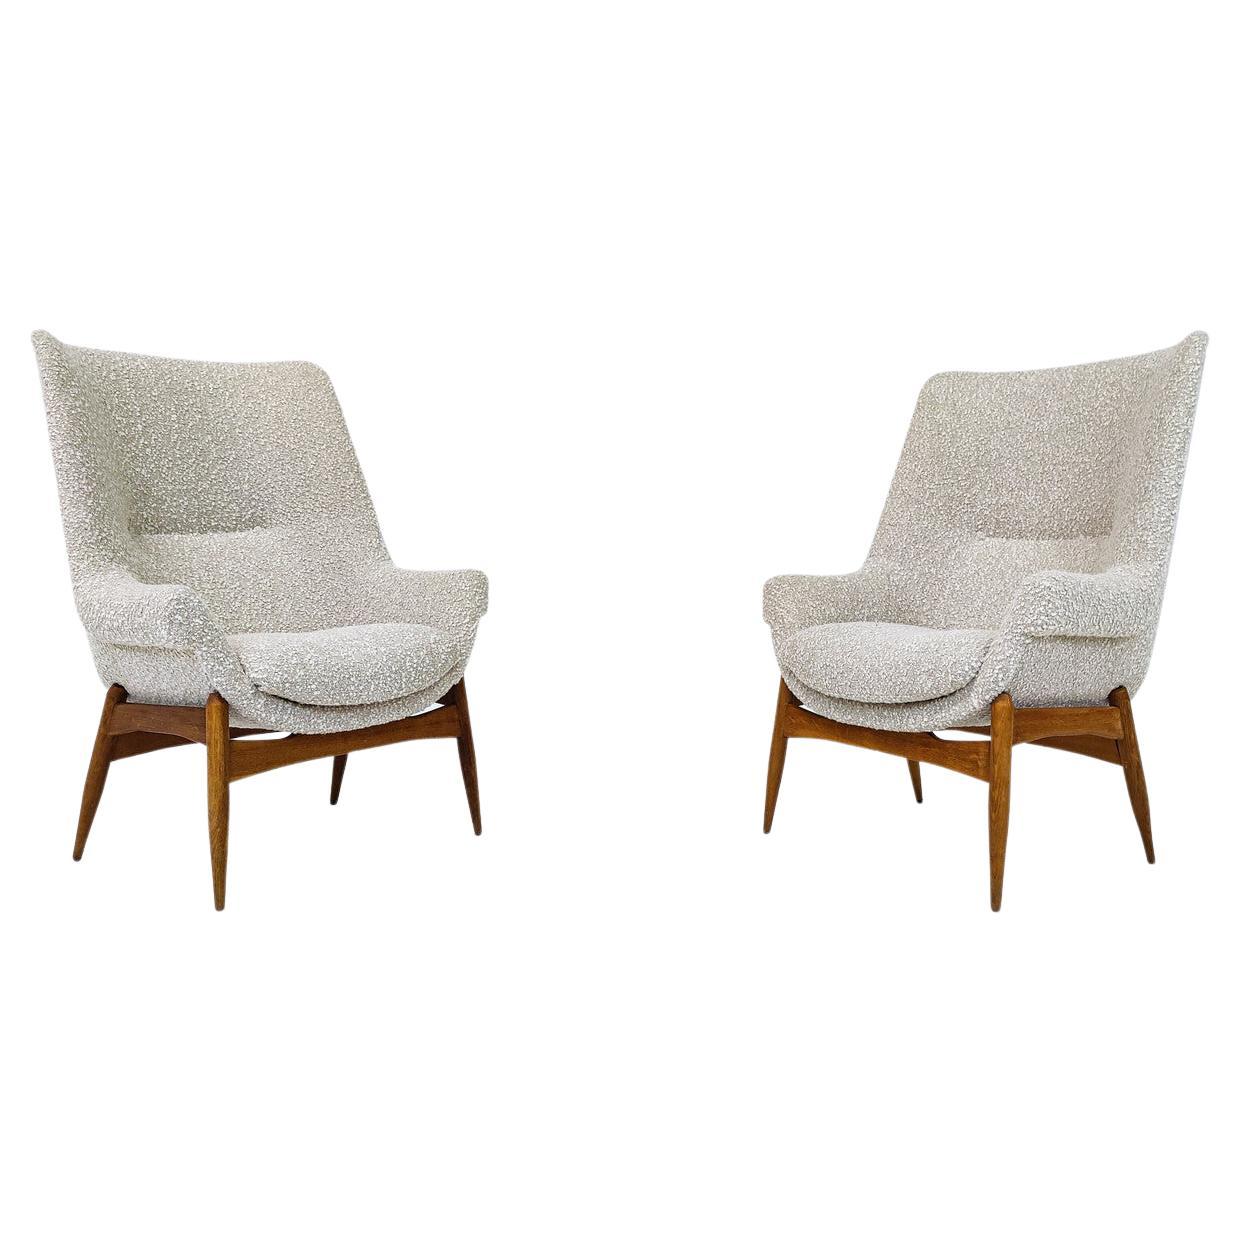 Pair of Mid-Century Modern Beige Fabric Armchairs by Julia Gaubek, Hungary, 1950 For Sale